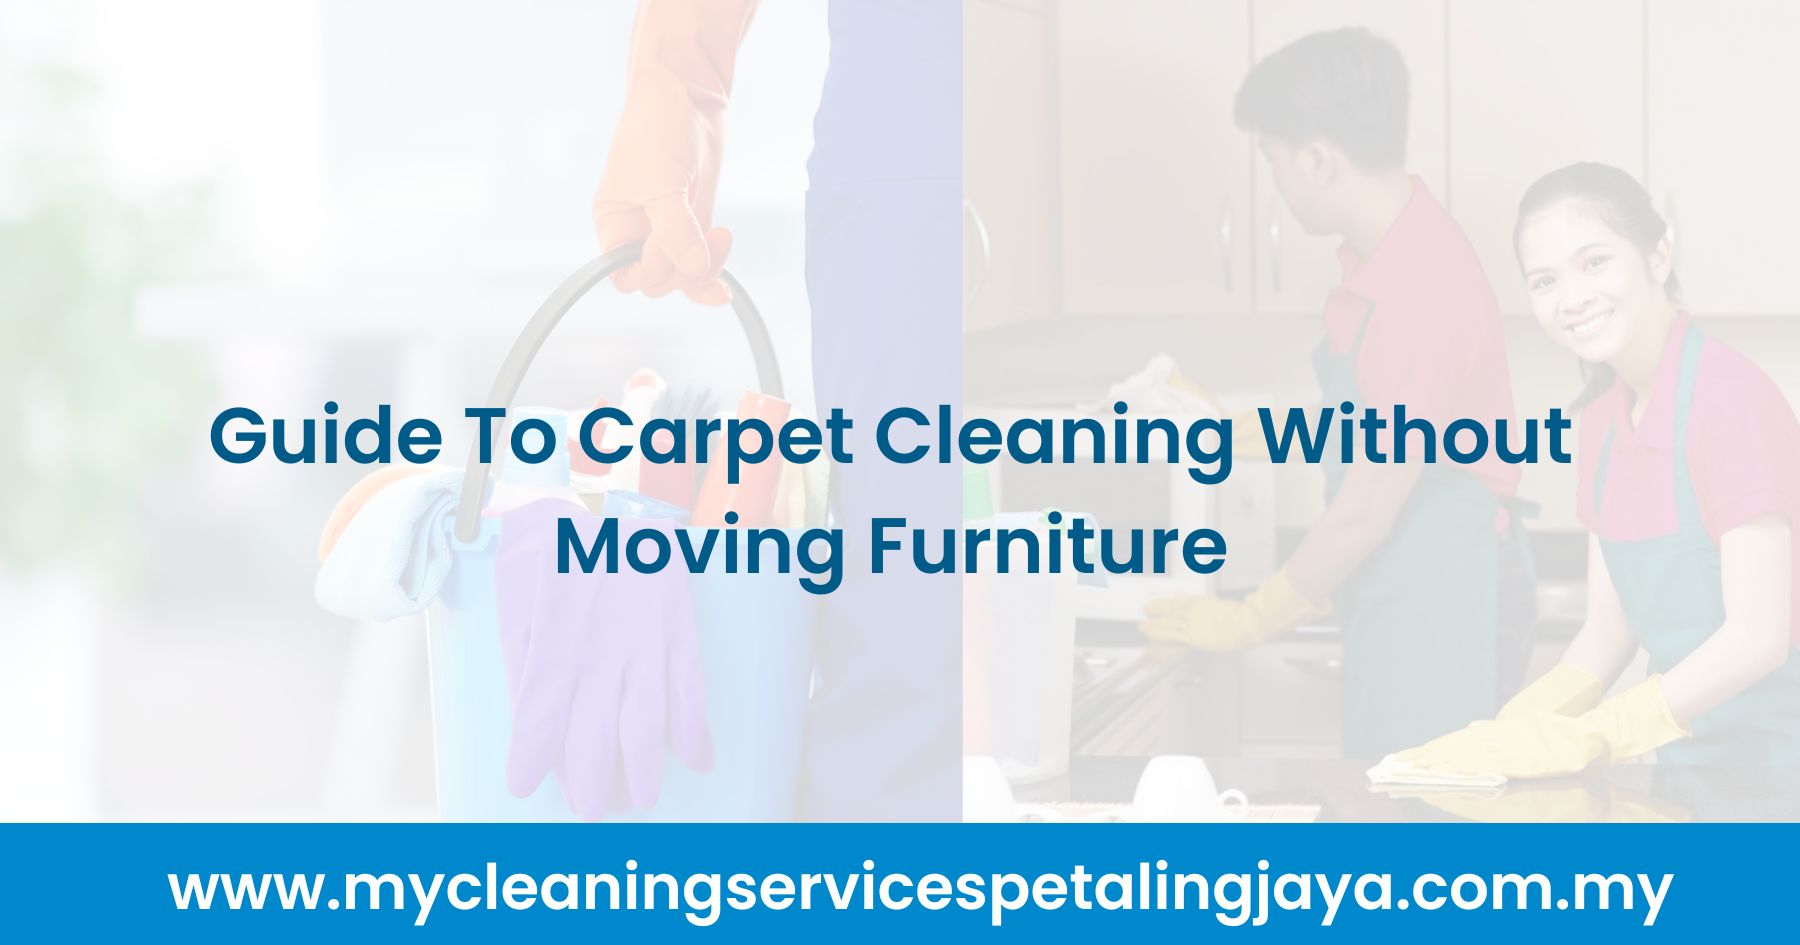 Guide To Carpet Cleaning Without Moving Furniture